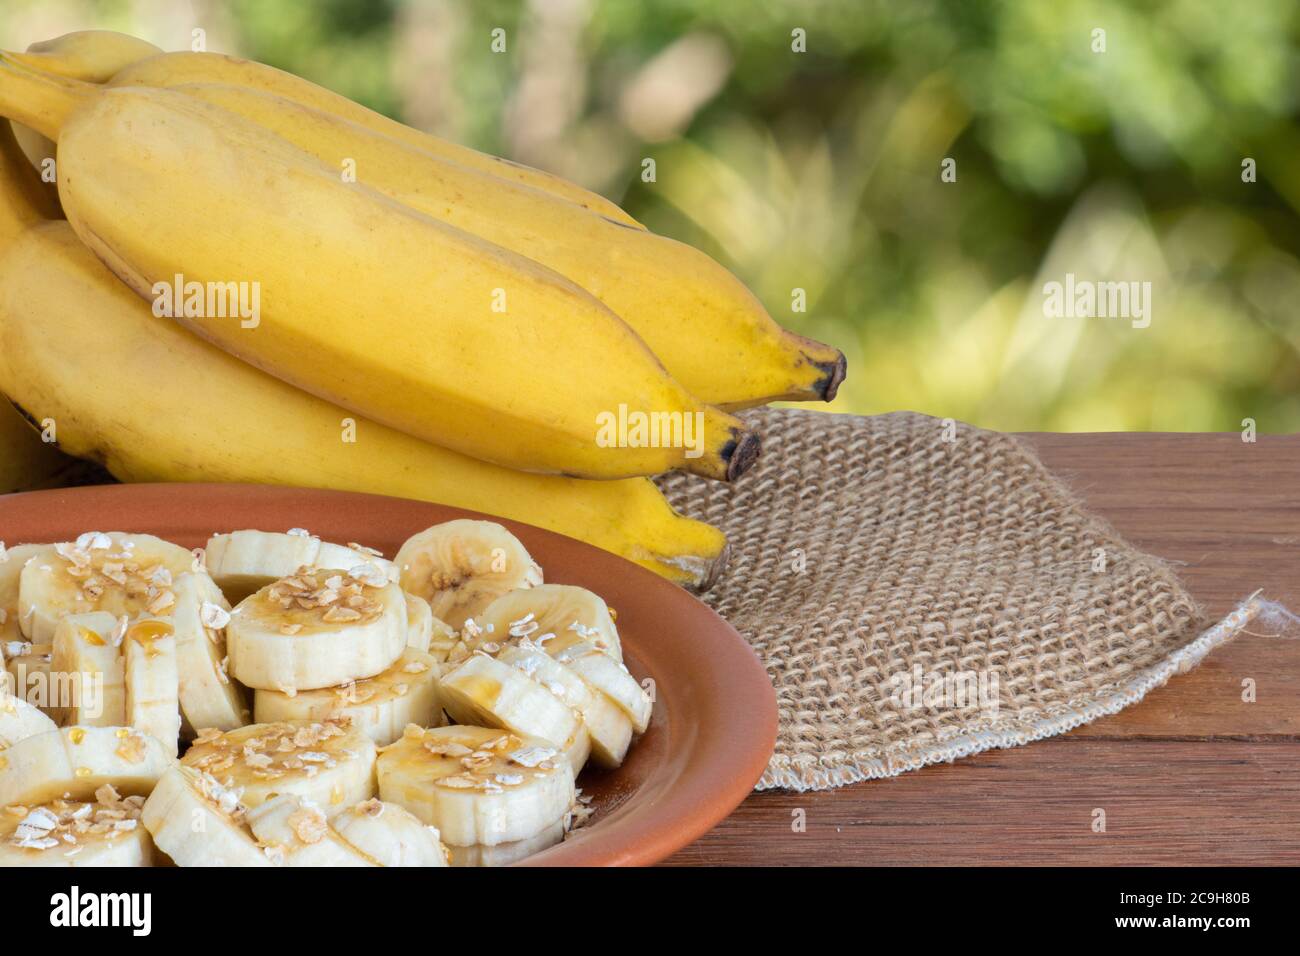 Organic bunch of ripe yellow bananas. Pieces cut on a plate with honey and oats. Isolated with blurred green background.Copy space Stock Photo